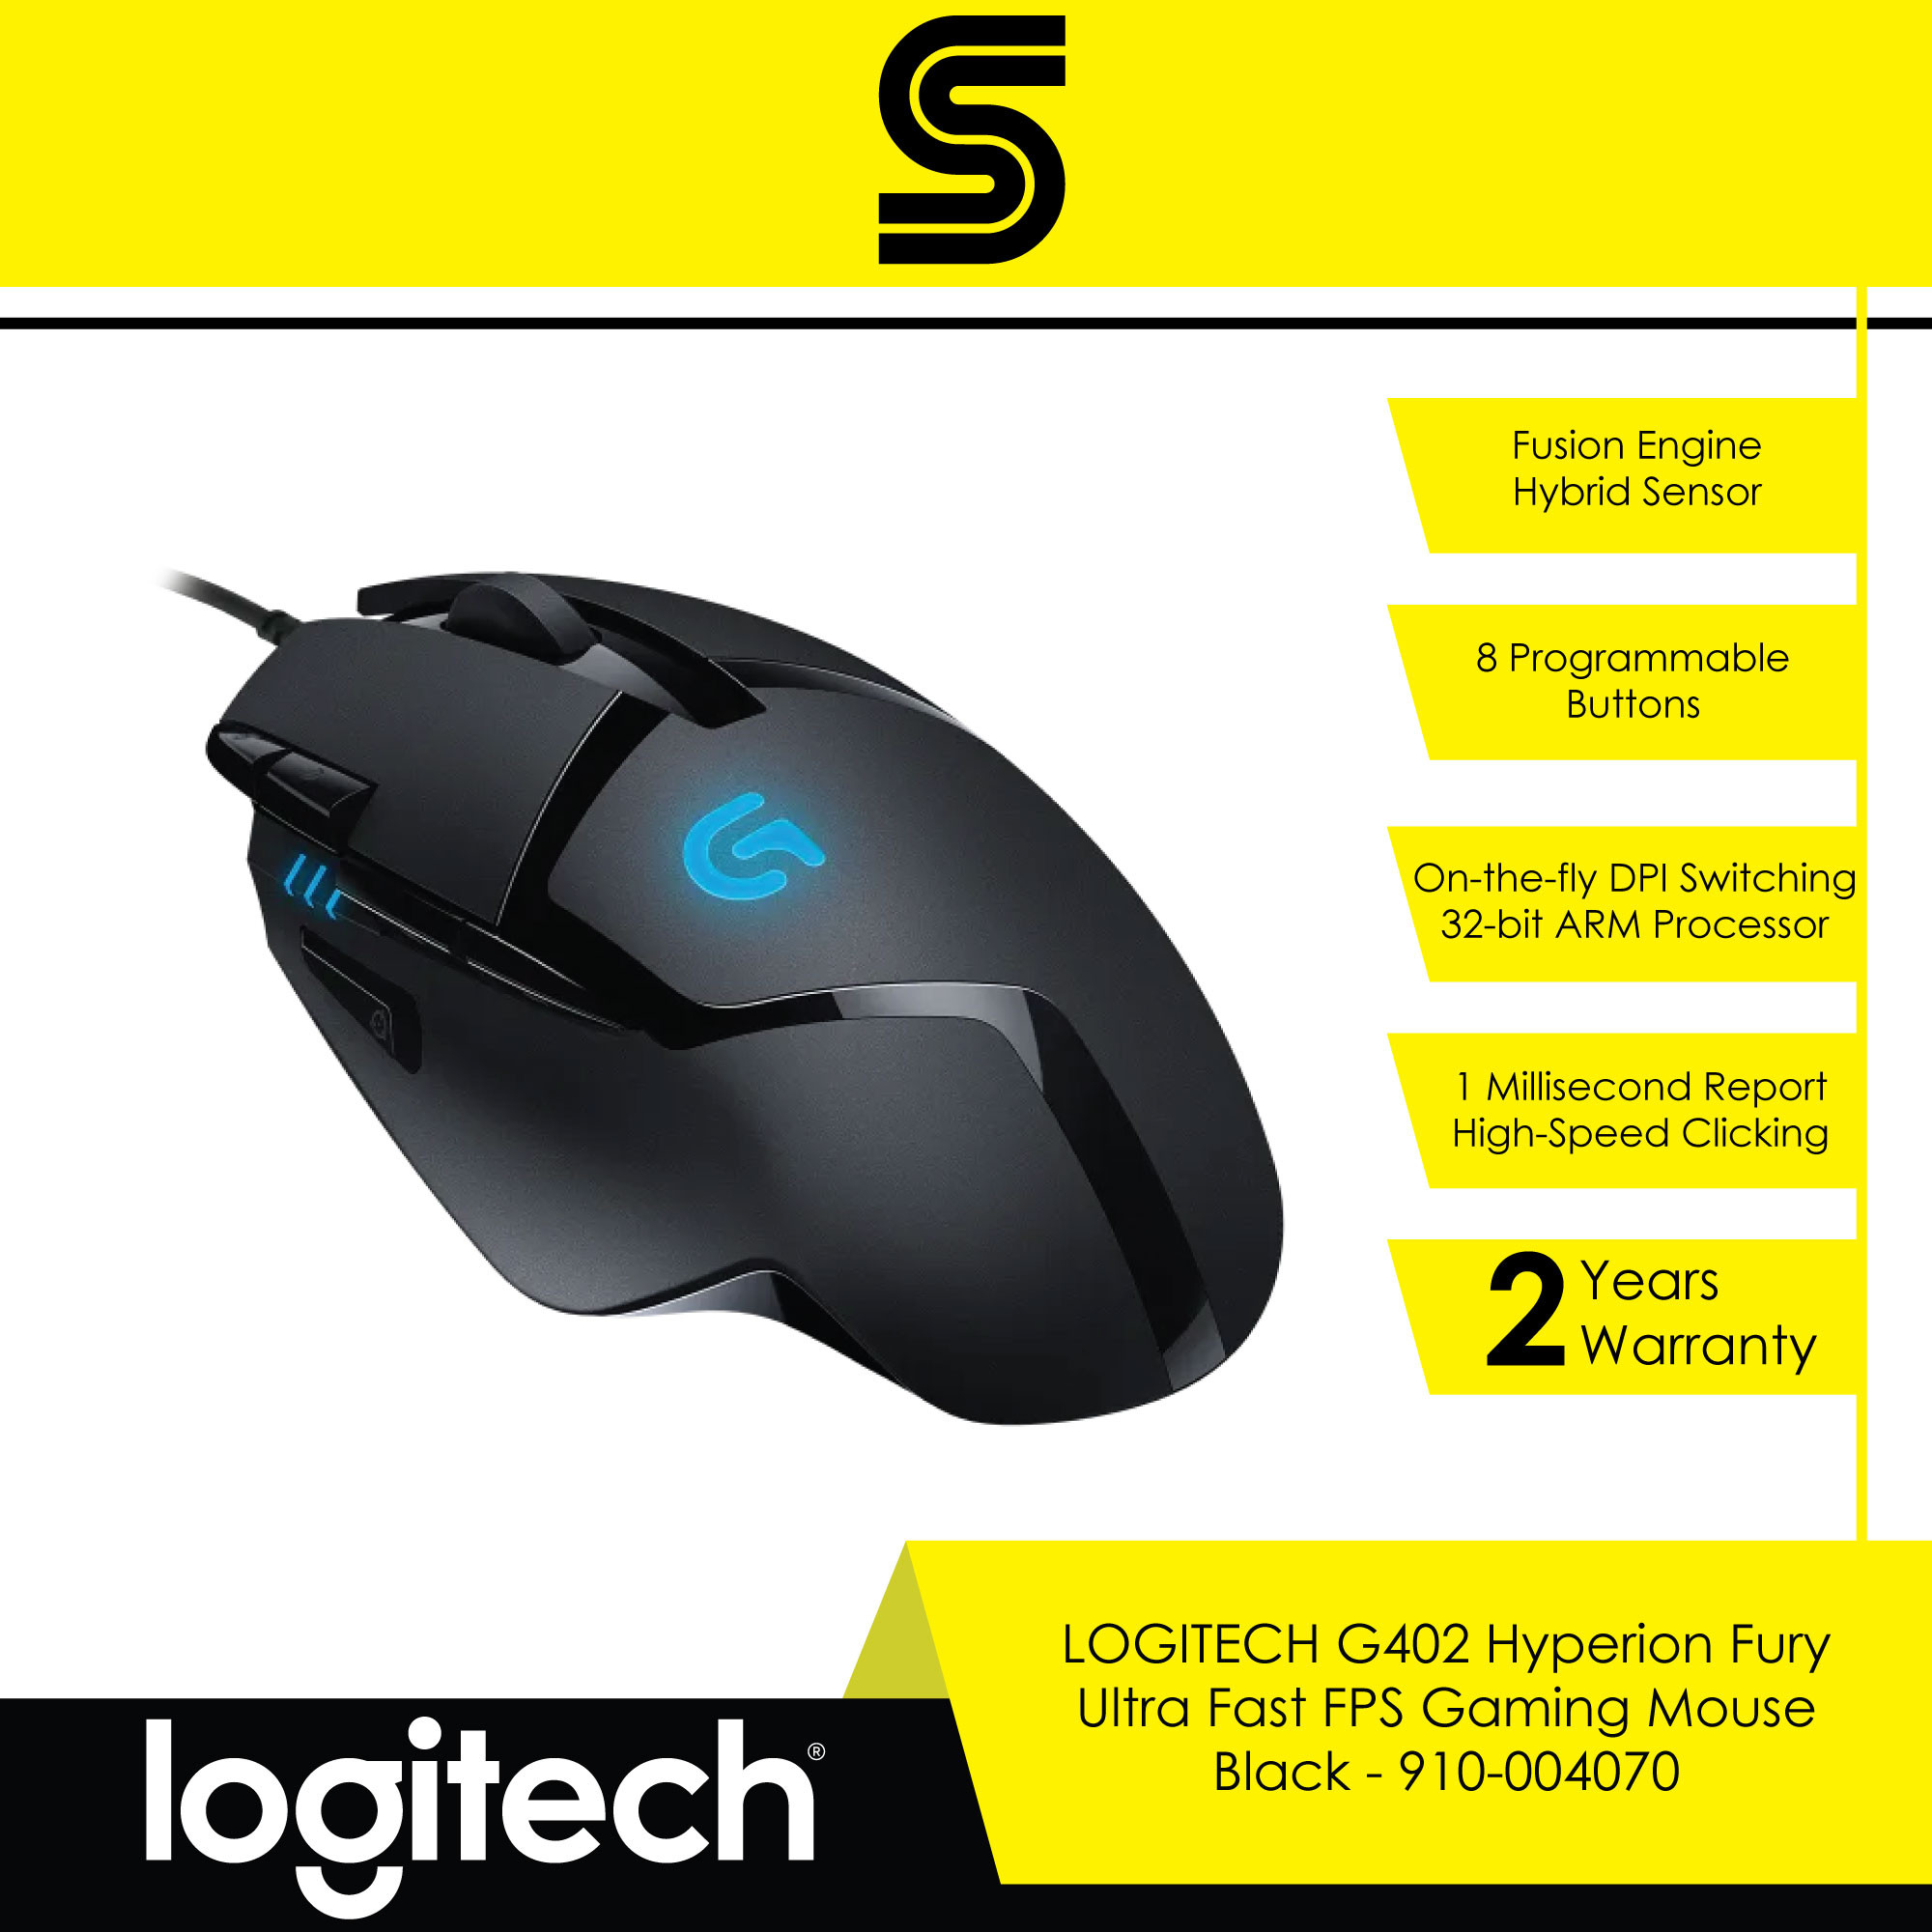 Logitech G402 Hyperion Fury FPS Gaming Mouse with High Speed Fusion Engine